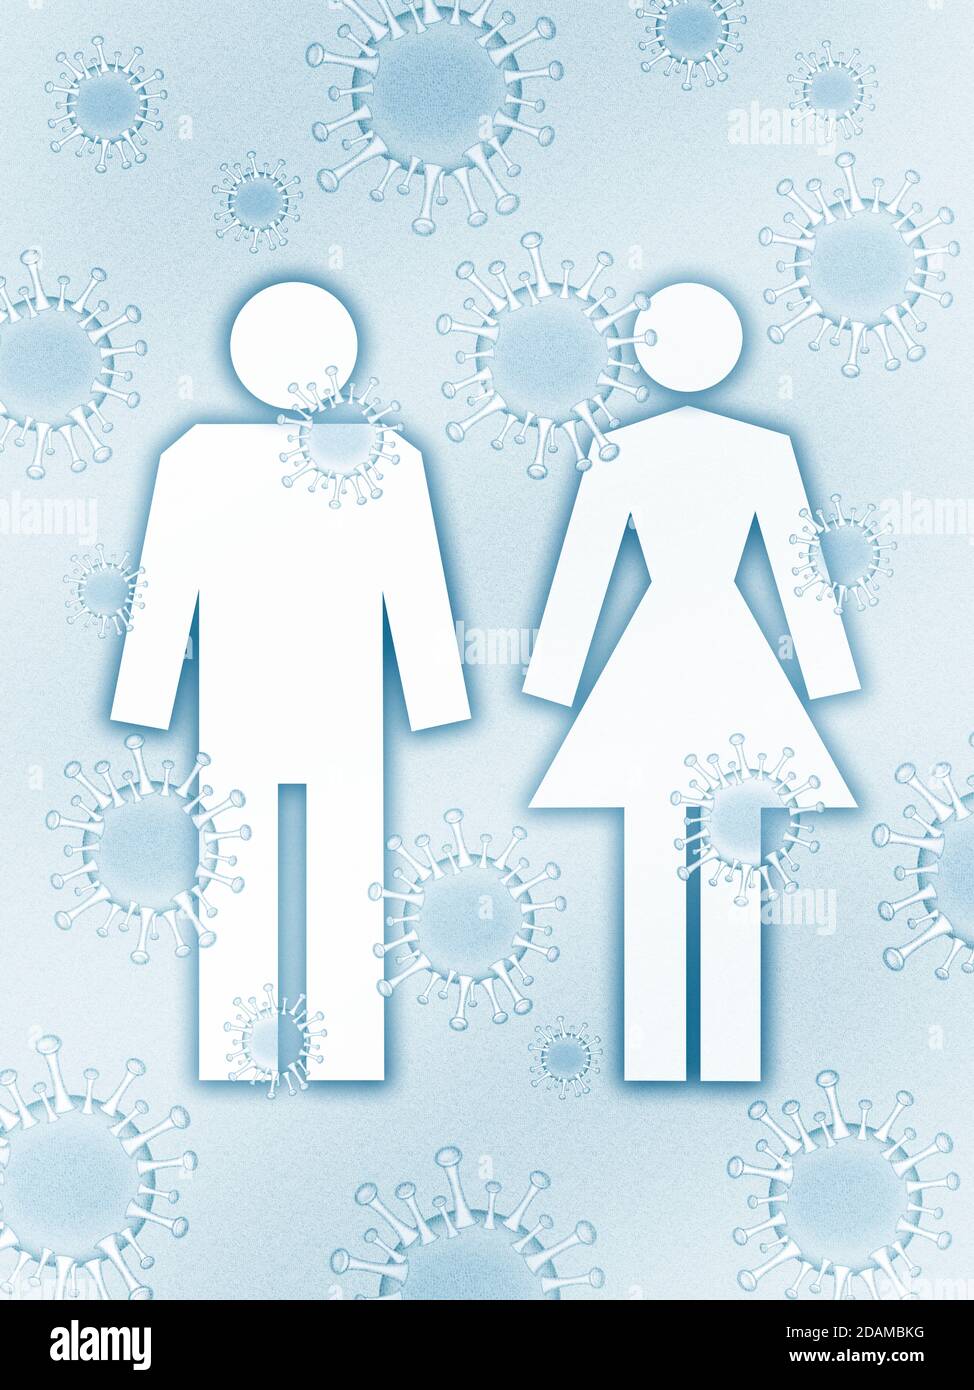 Man and woman surrounded by covid-19 viruses, illustration. Stock Photo